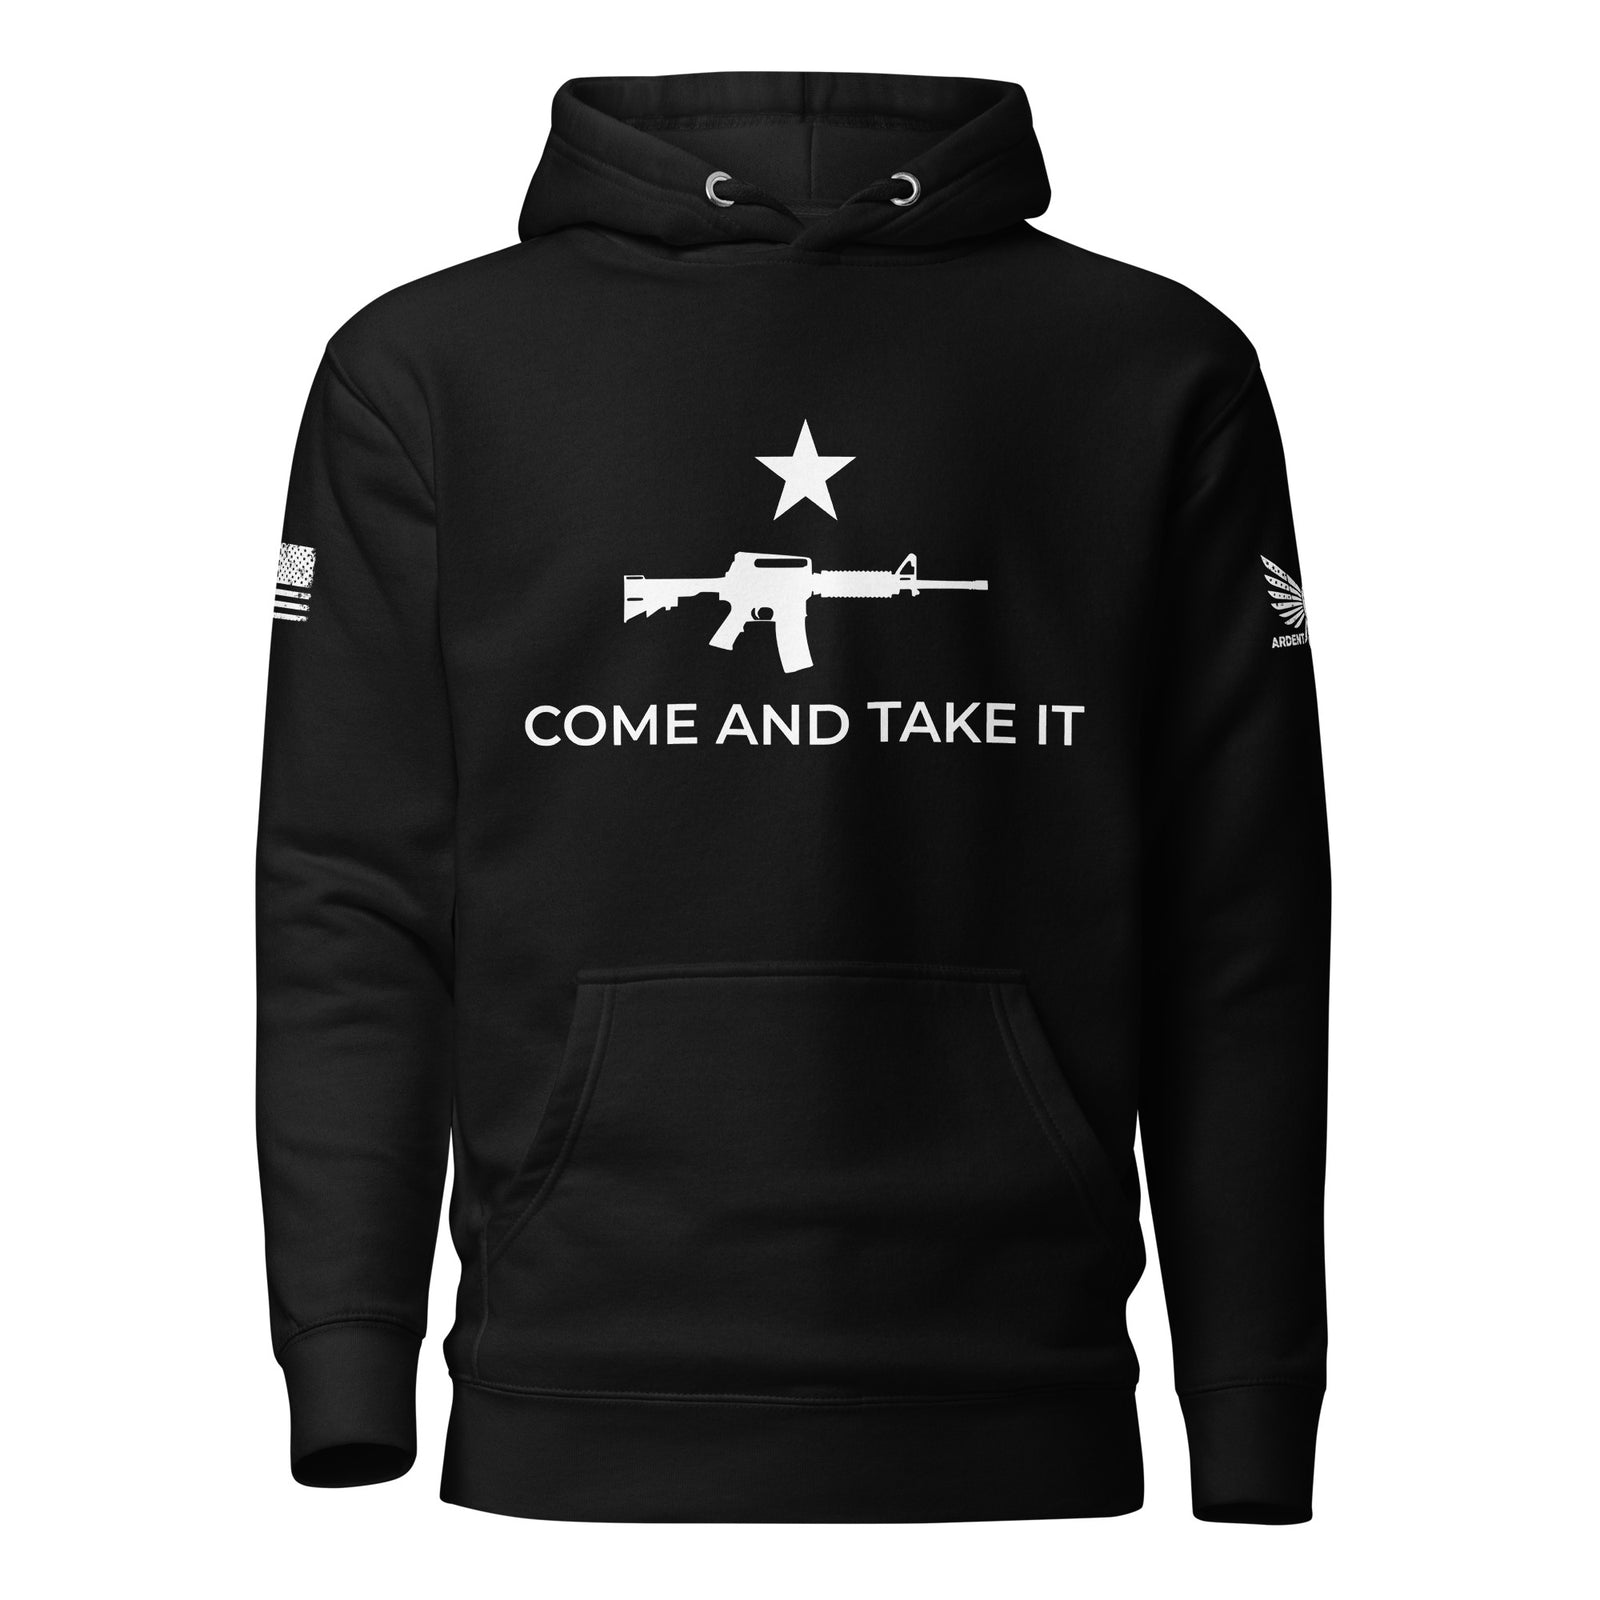 Come And Take It Hoodie-Premium Hoodie-Black-S-Ardent Patriot Apparel Co.